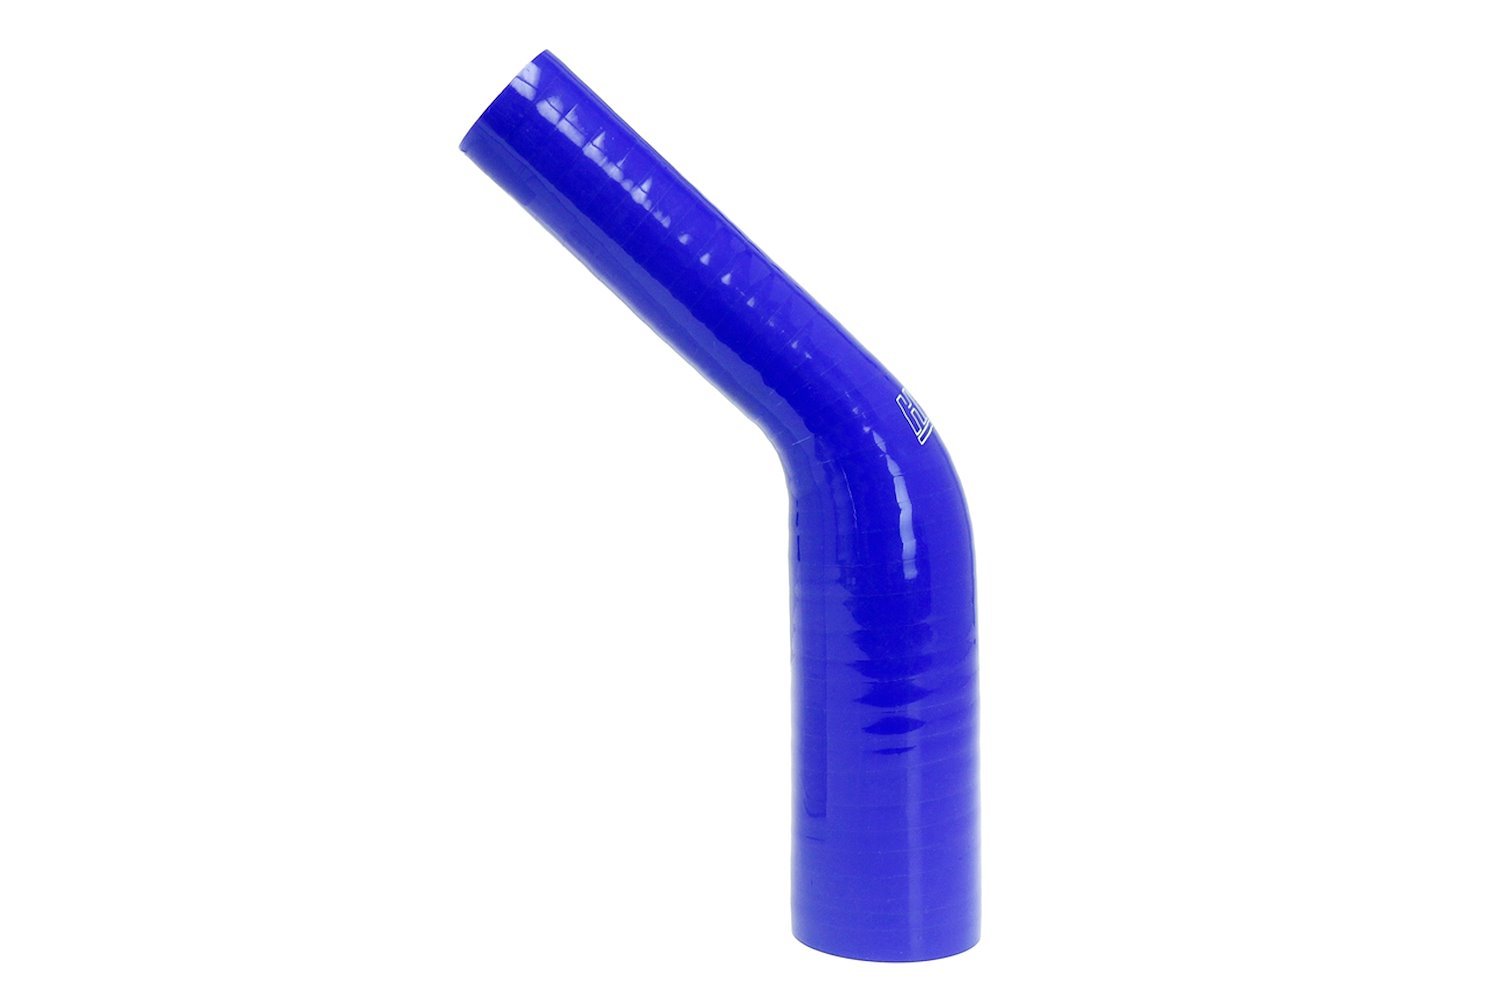 HTSER45-187-212-BLUE Silicone 45-Degree Elbow Hose, High-Temp 4-Ply Reinforced, 1-7/8 in. - 2-1/8 in. ID, Blue